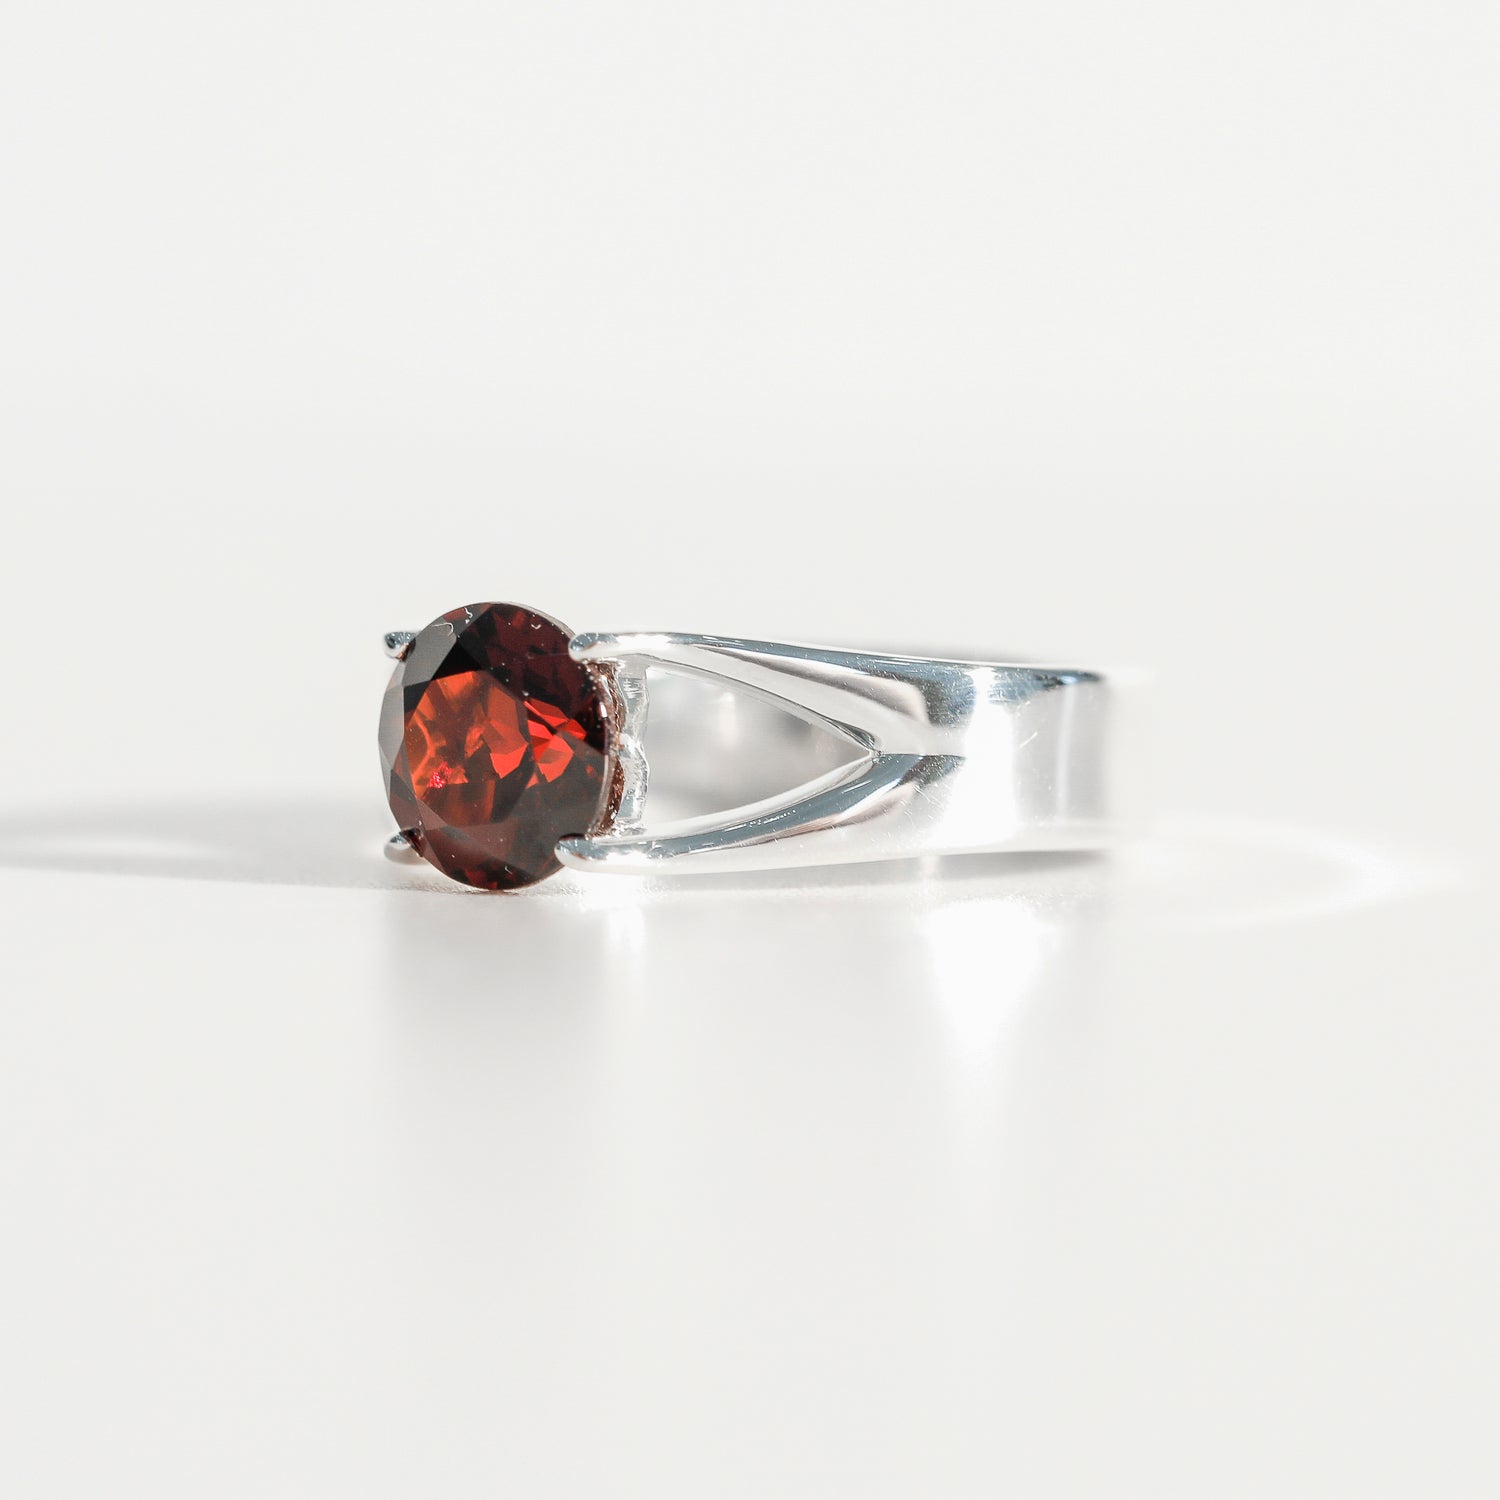 14kt Yellow Gold “Skinny” Ring with Garnet | More Than Just Rings